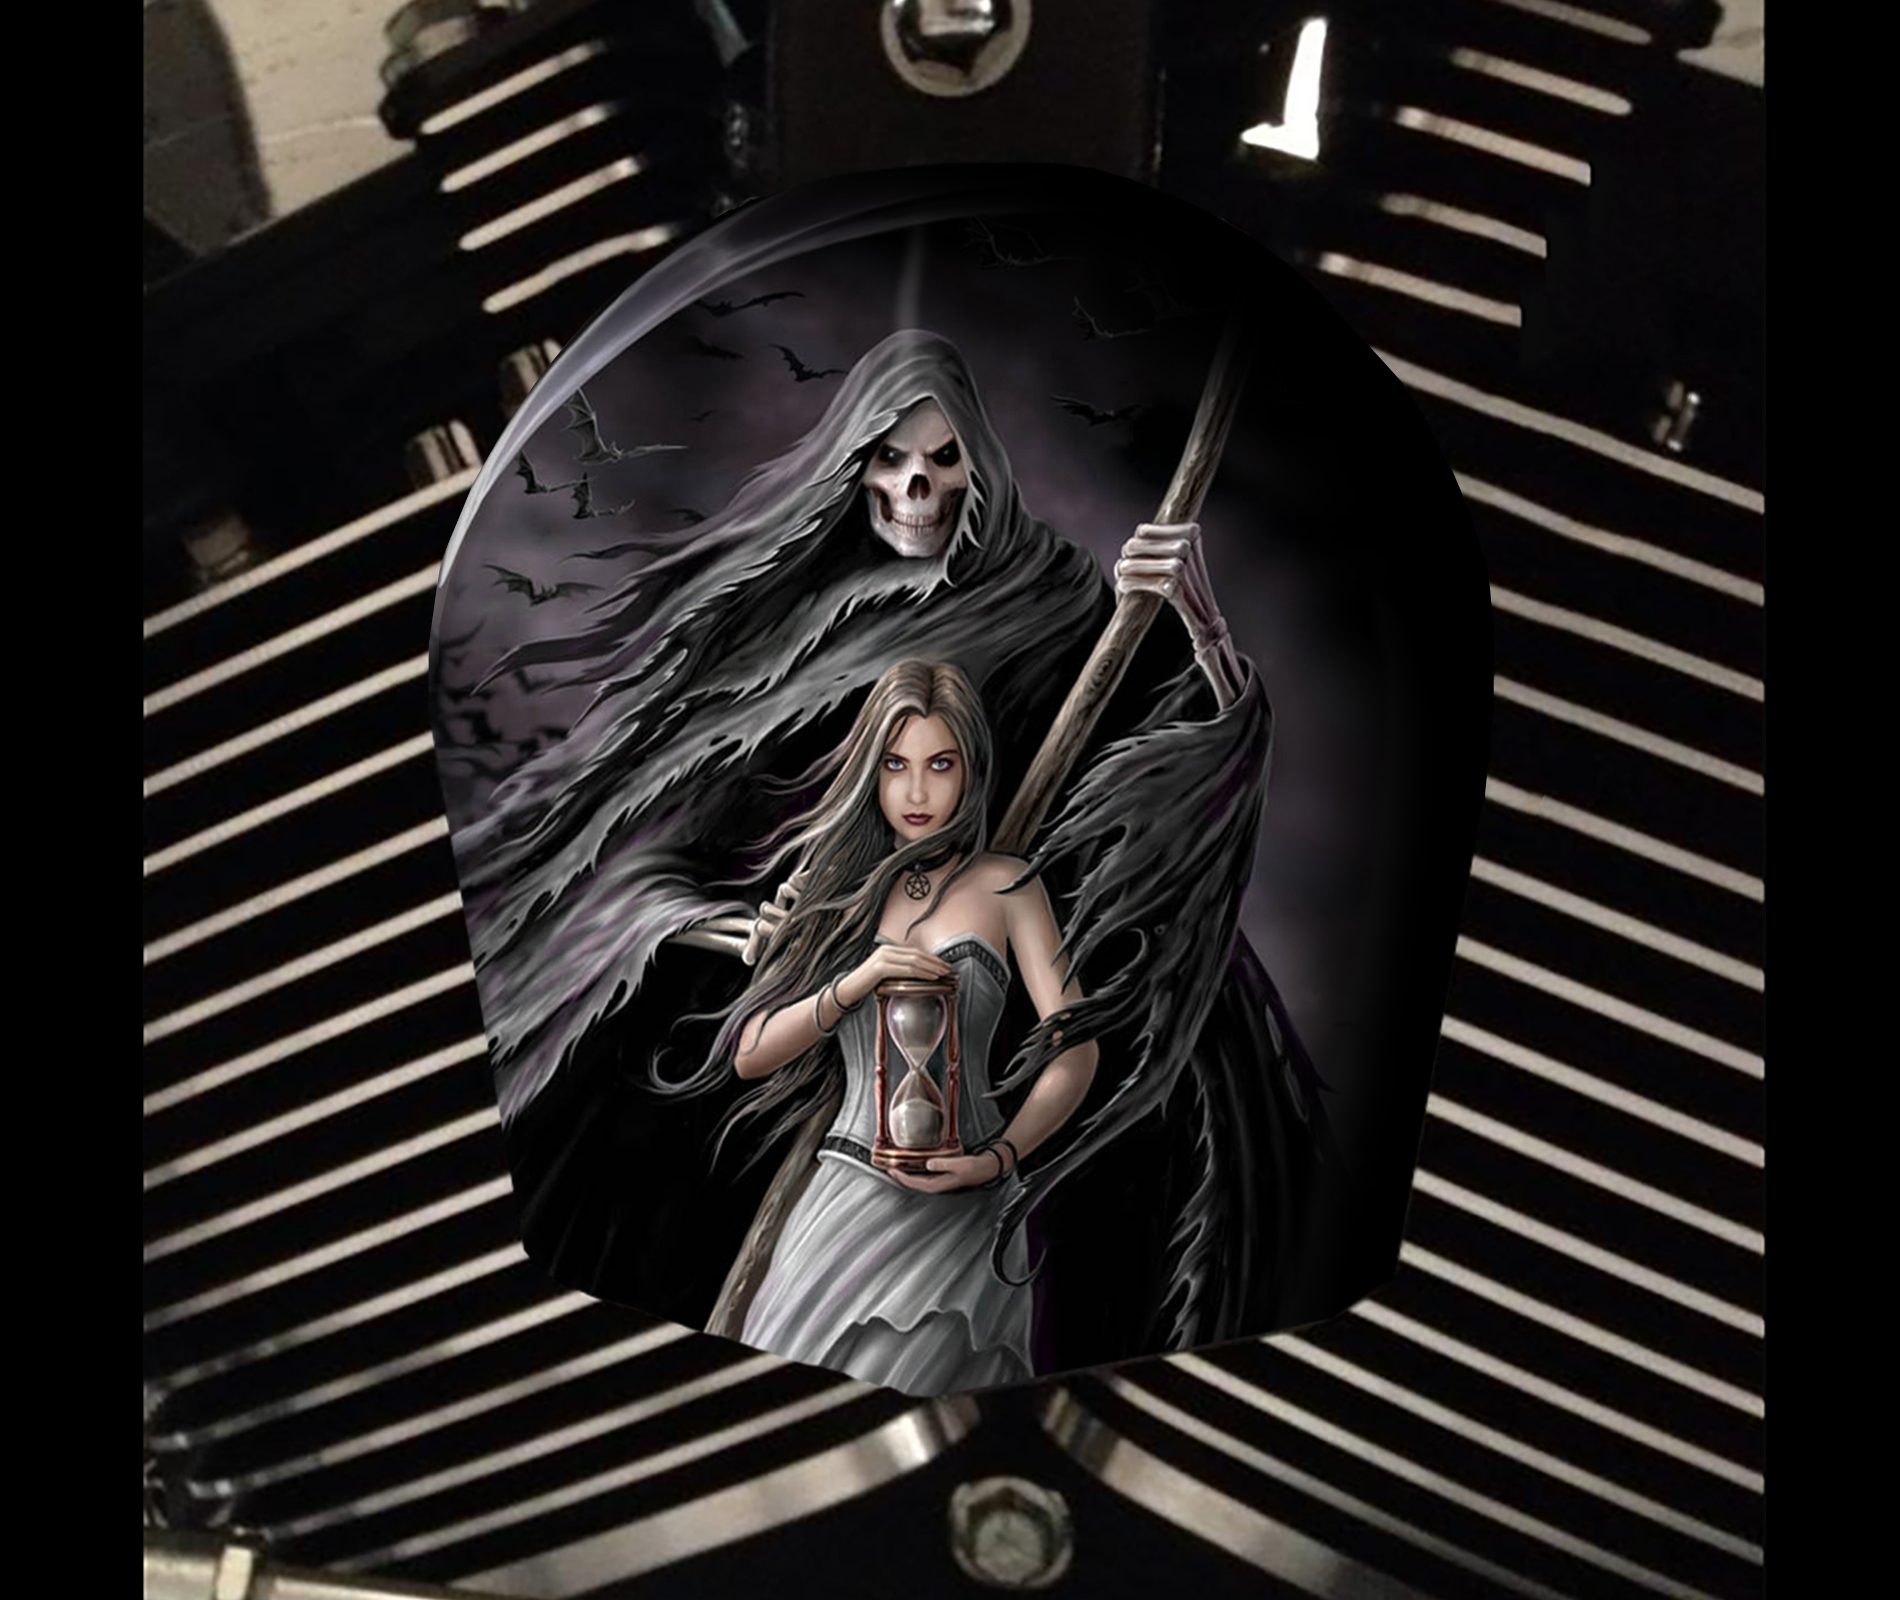 Custom Horn Cover - Reaper And Girl With Hourglass